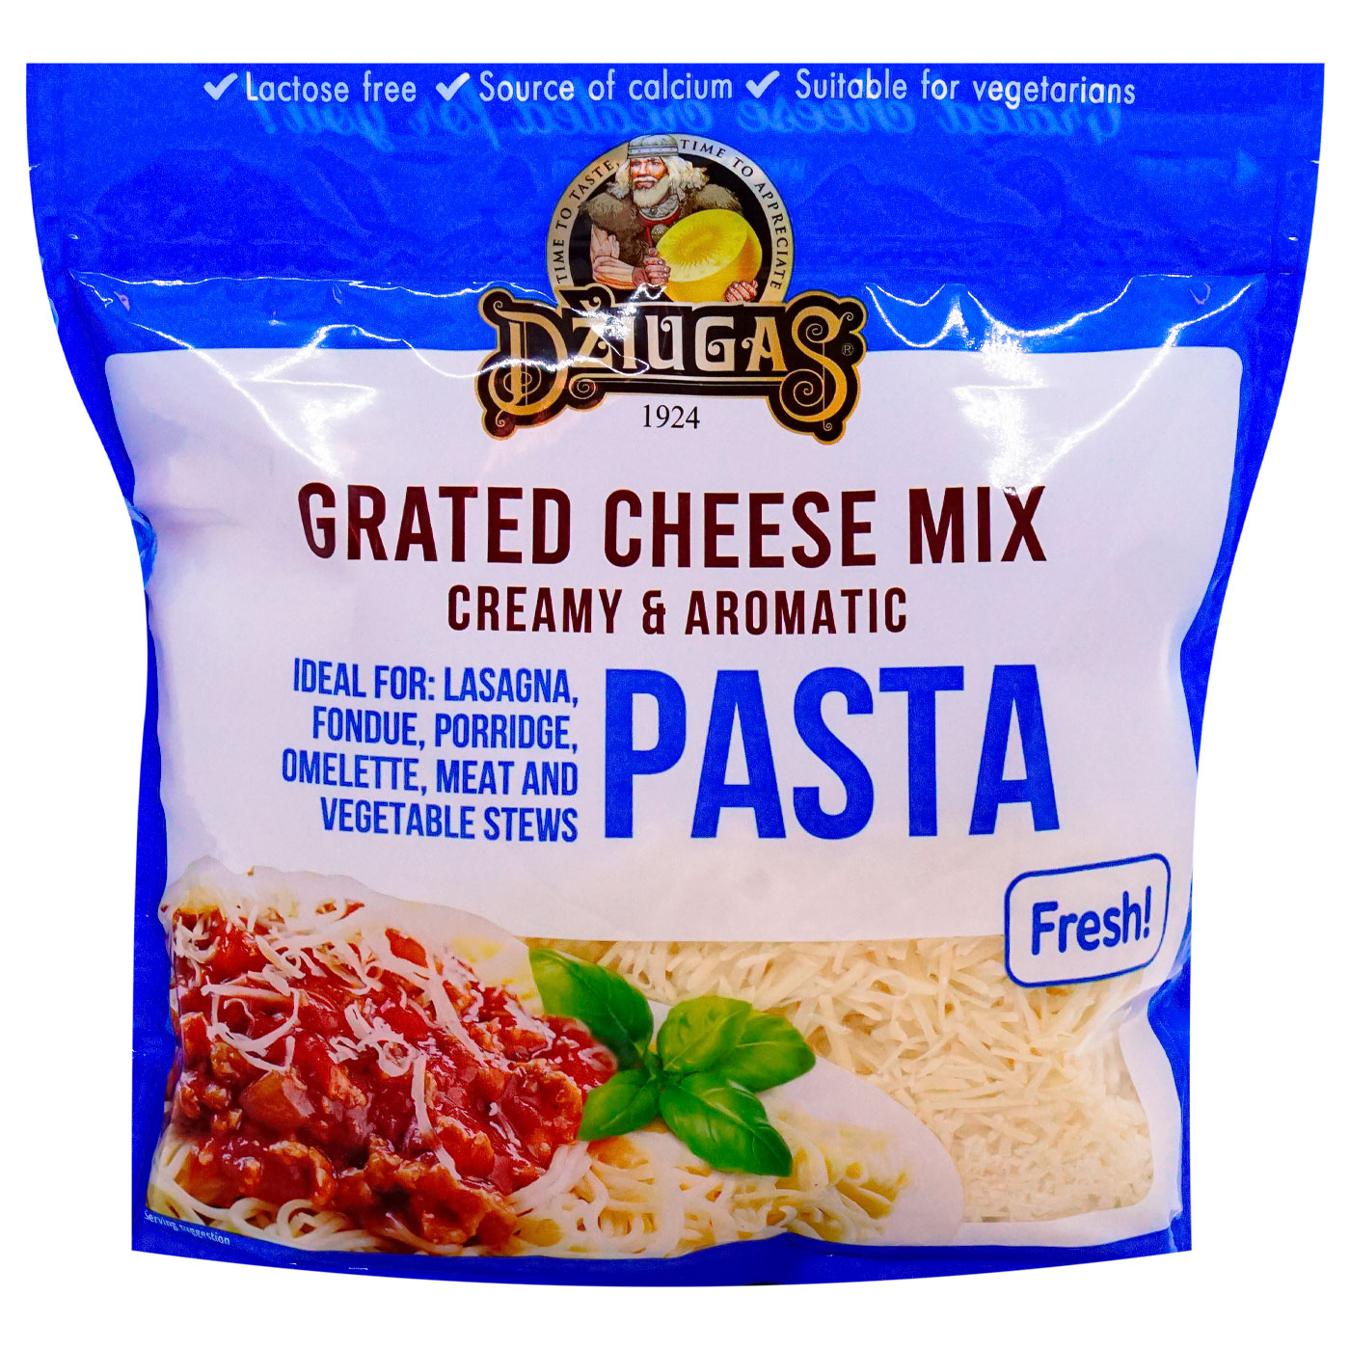 Dziugas mixture of grated cheeses for pasta 200g